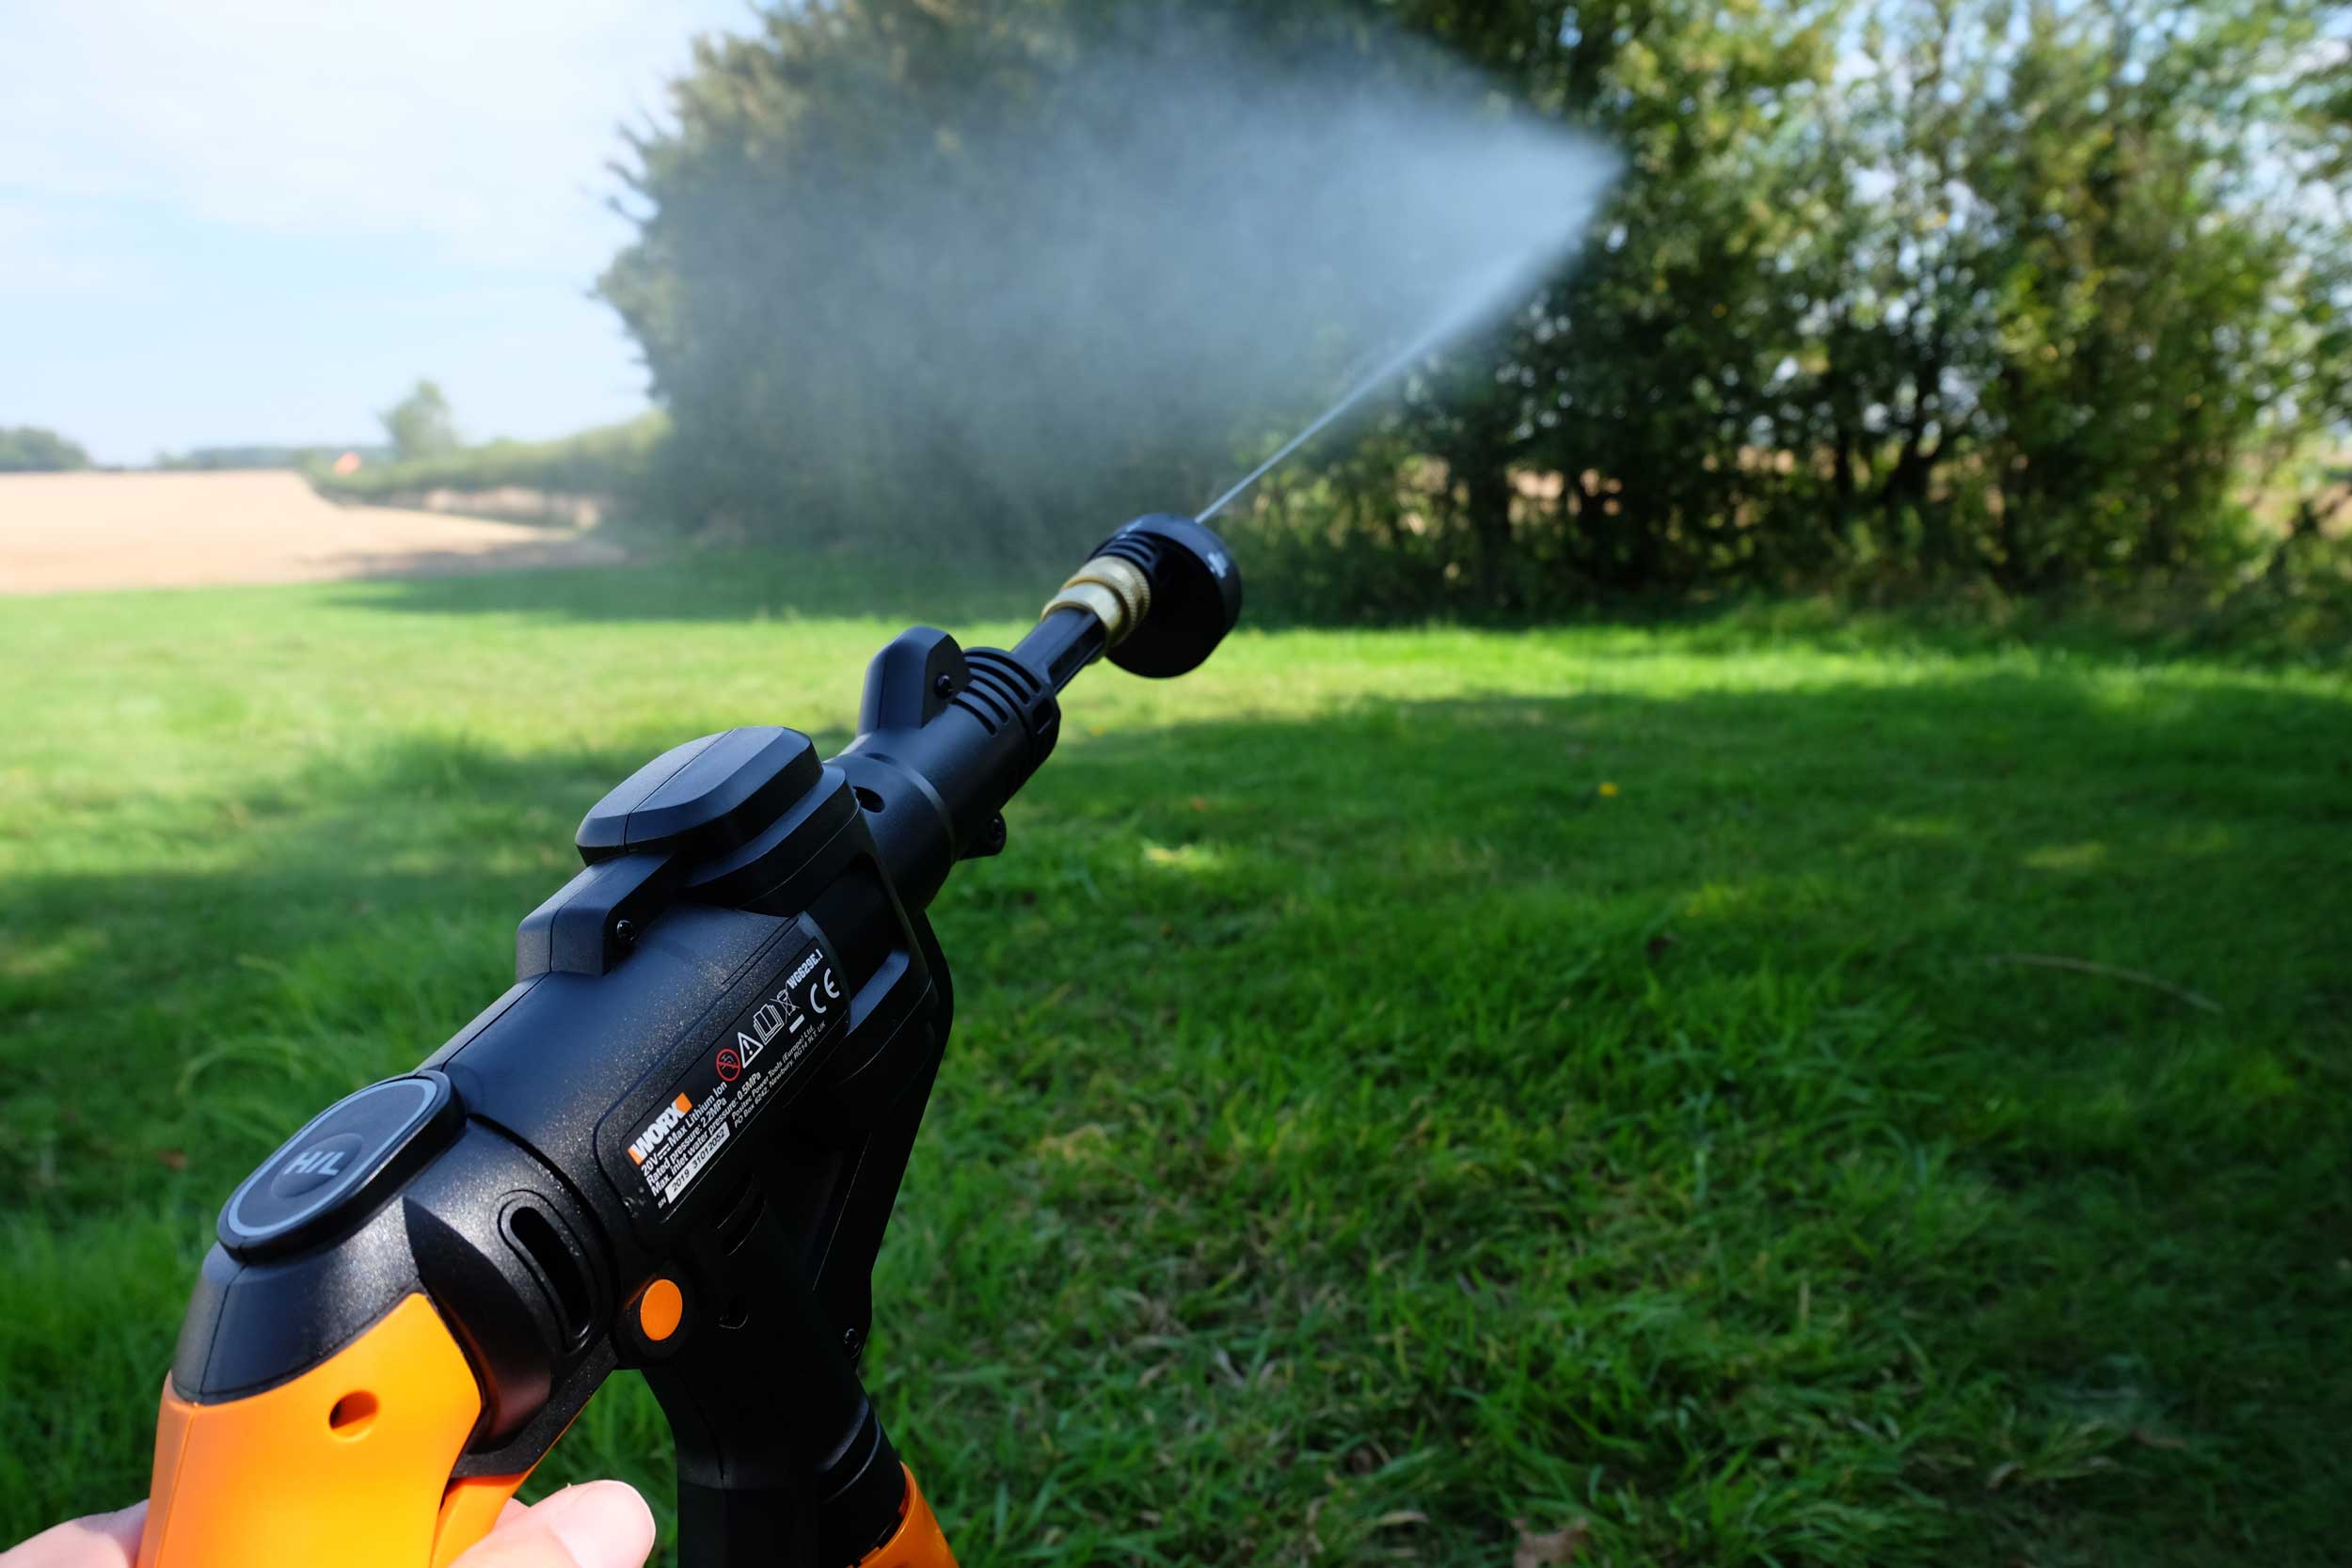 How to Use a Pressure Washer With Hot Water